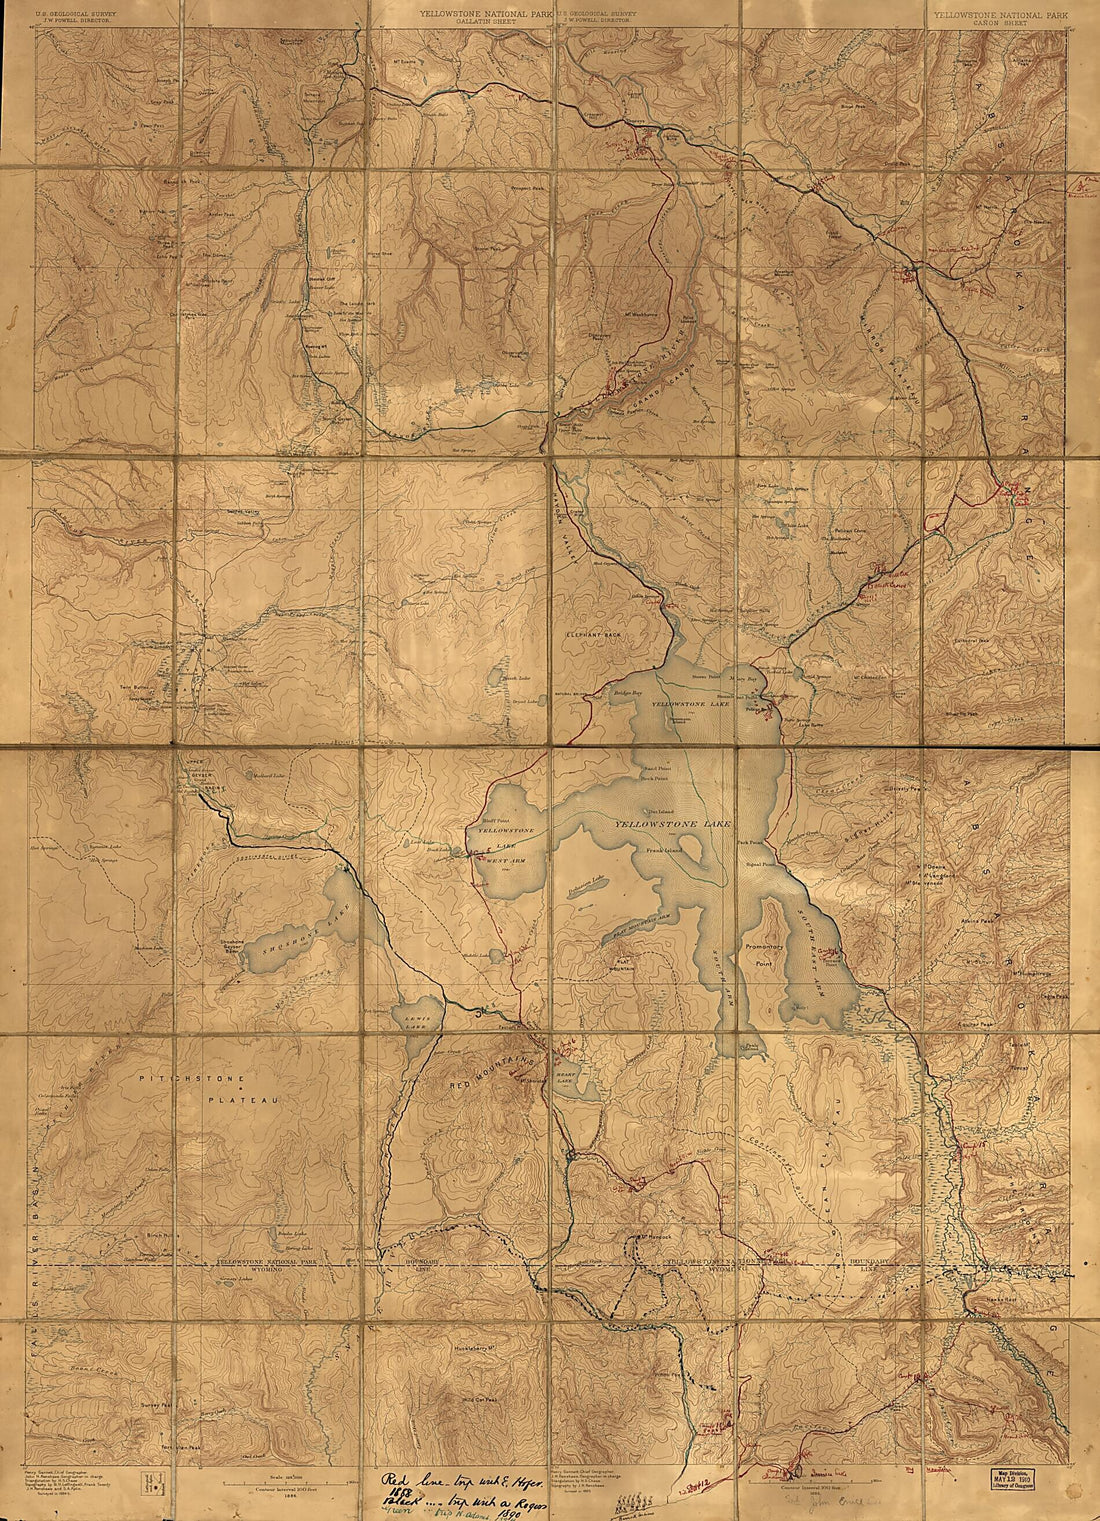 This old map of Yellowstone National Park from 1886 was created by Henry Gannett,  Geological Survey (U.S.), John Wesley Powell, John H. Renshawe in 1886